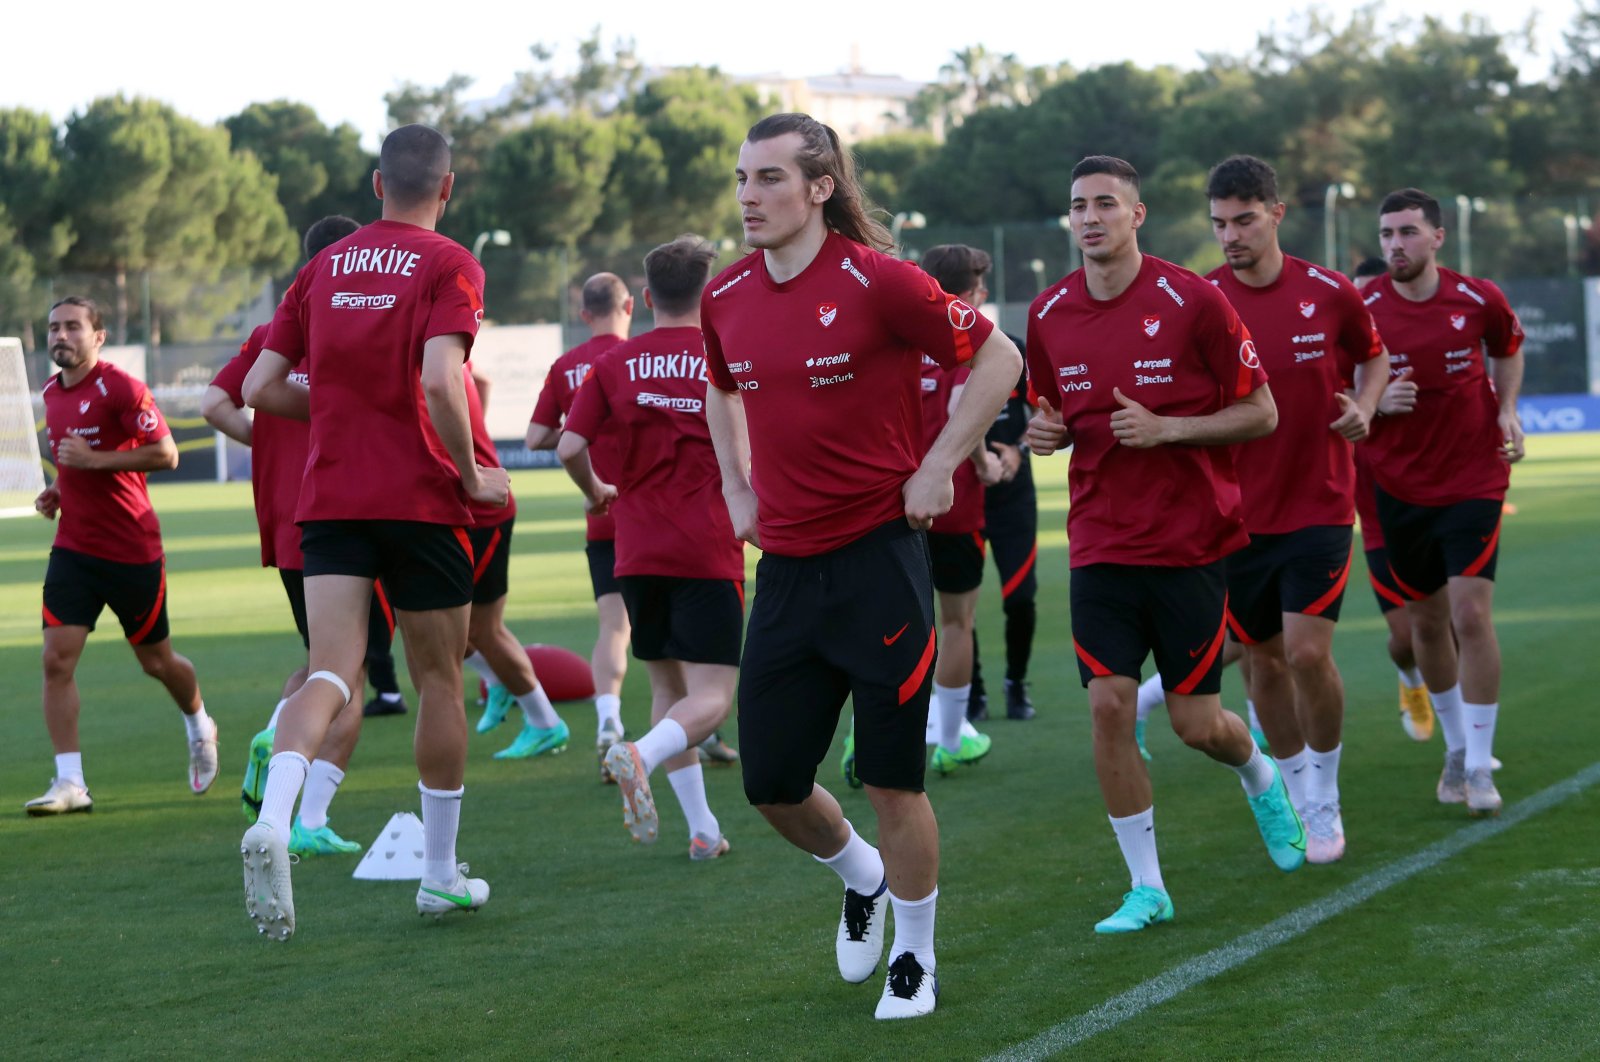 Turkish national team players attend a training session ahead of the Euro 2020, Antalya, southern Turkey, May 25, 2021. (DHA Photo)